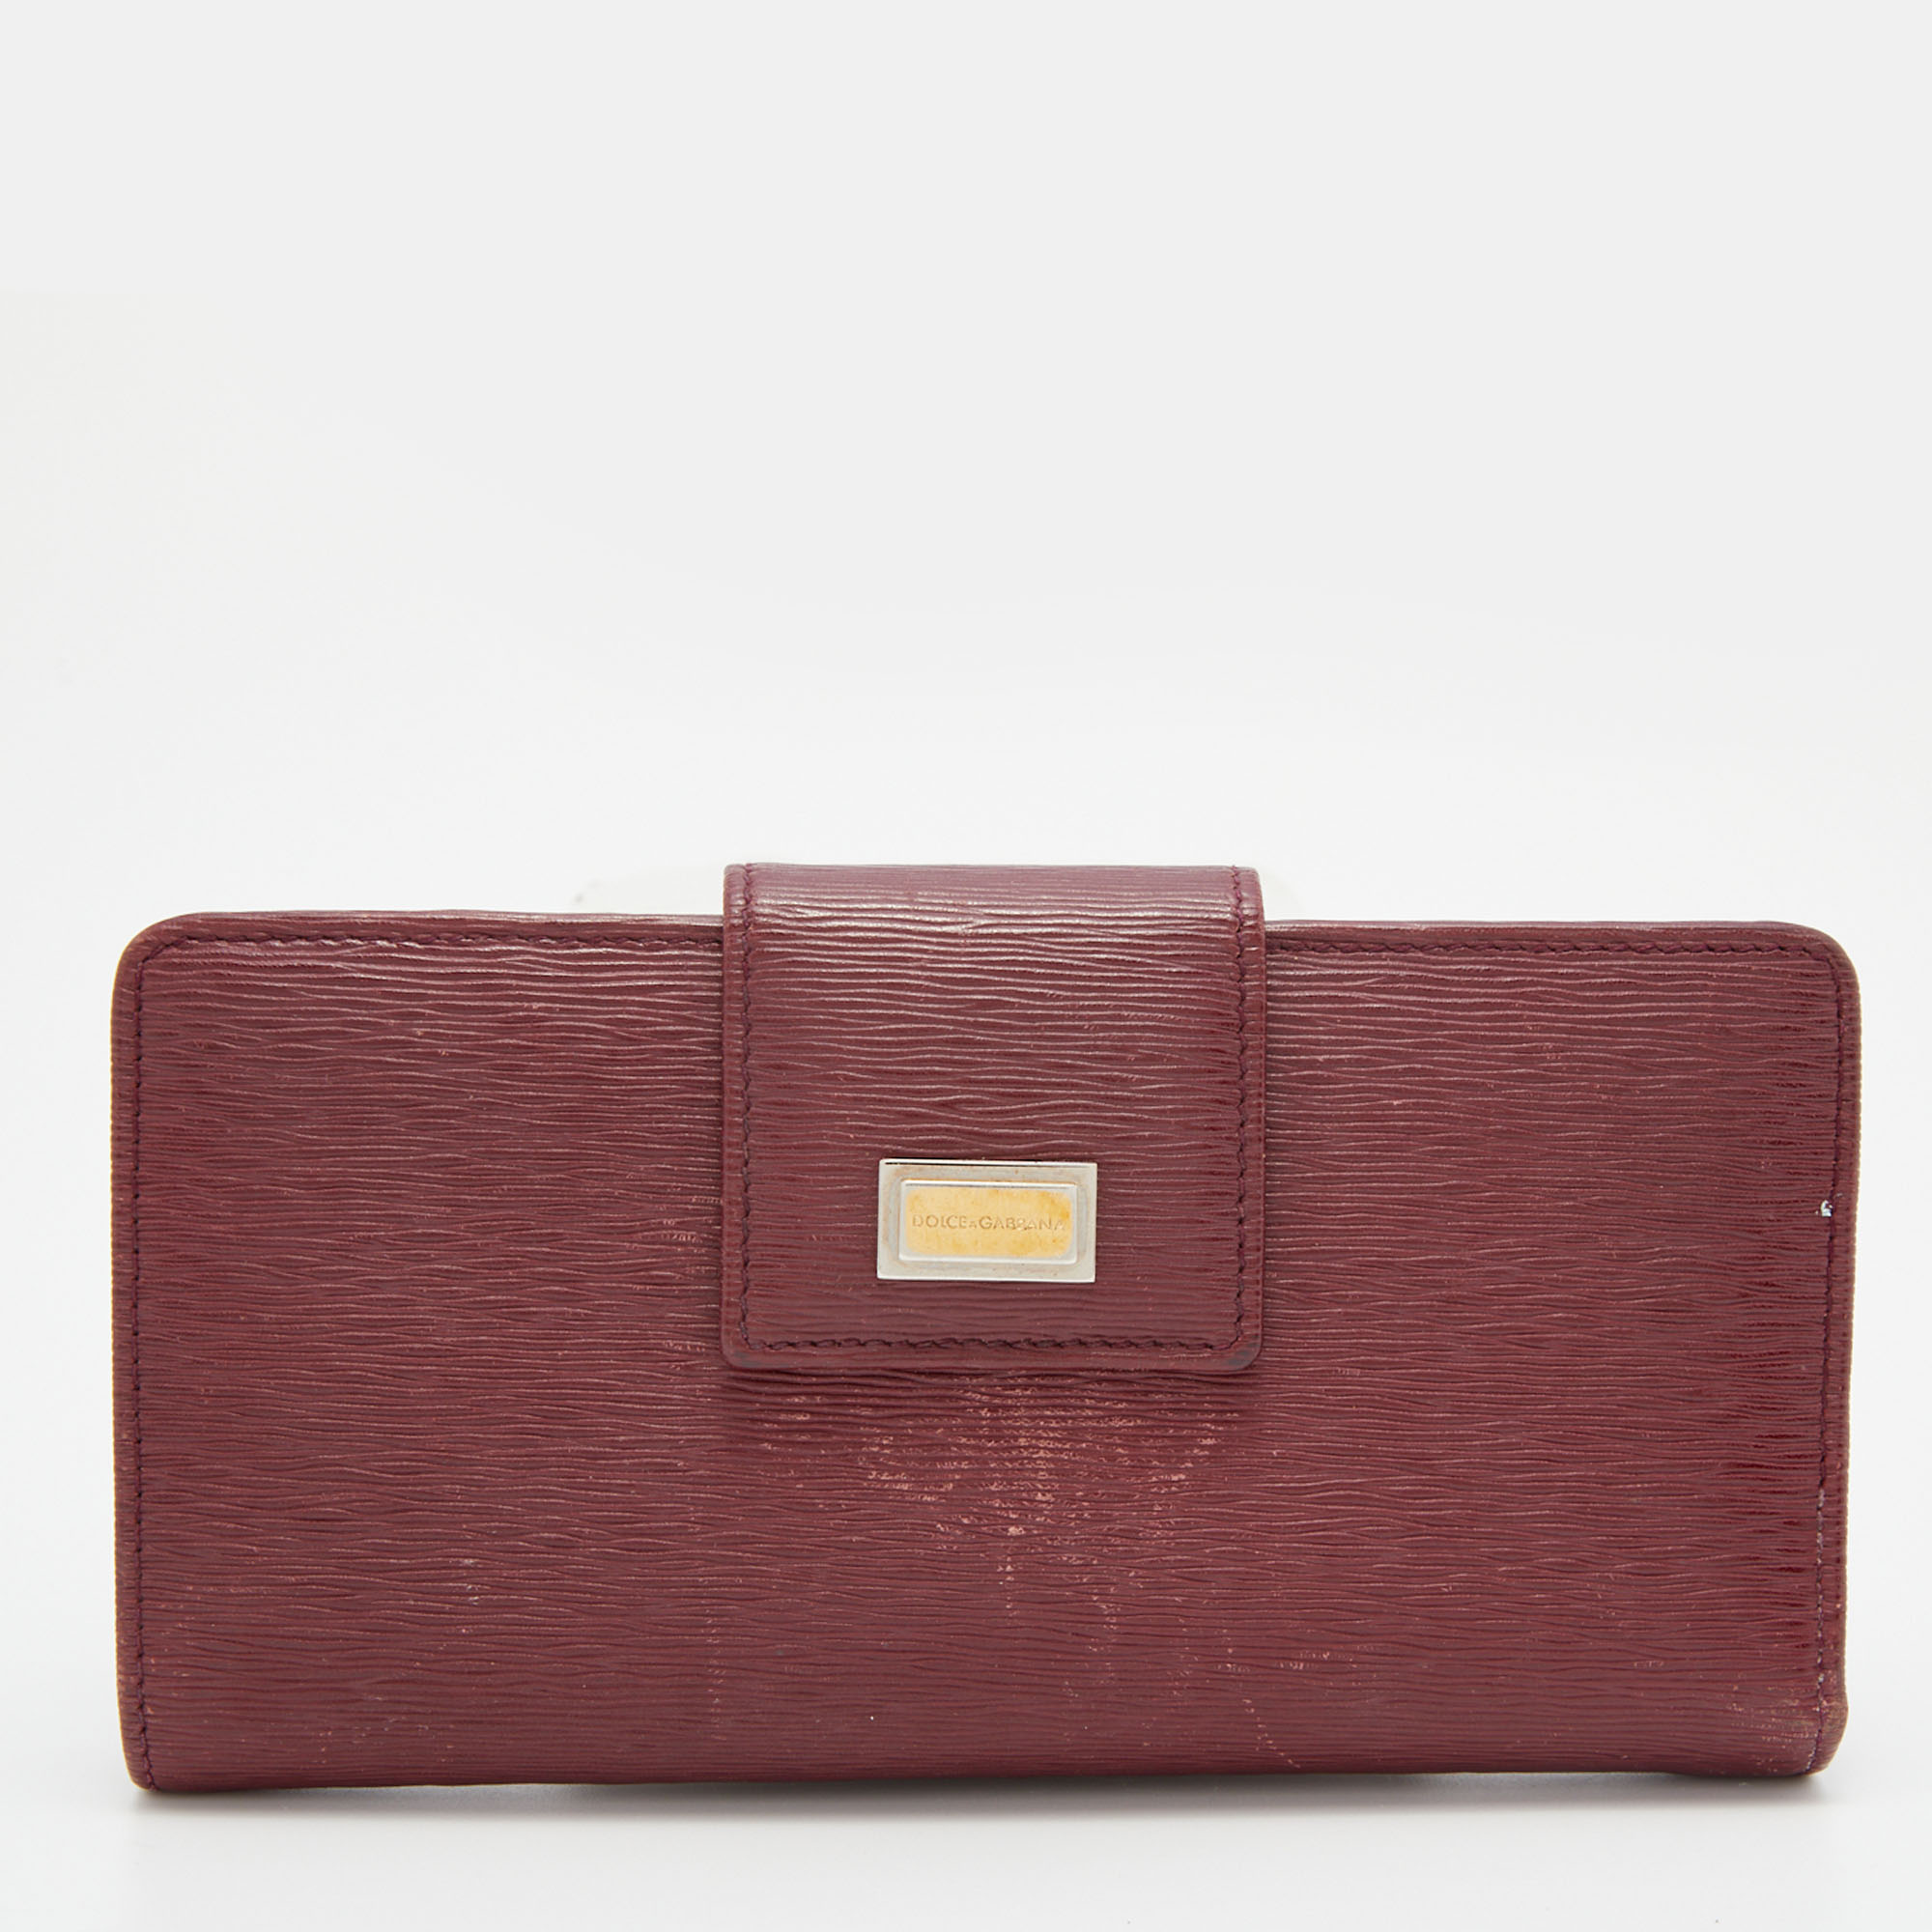 Dolce & gabbana burgundy leather flap continental wallet